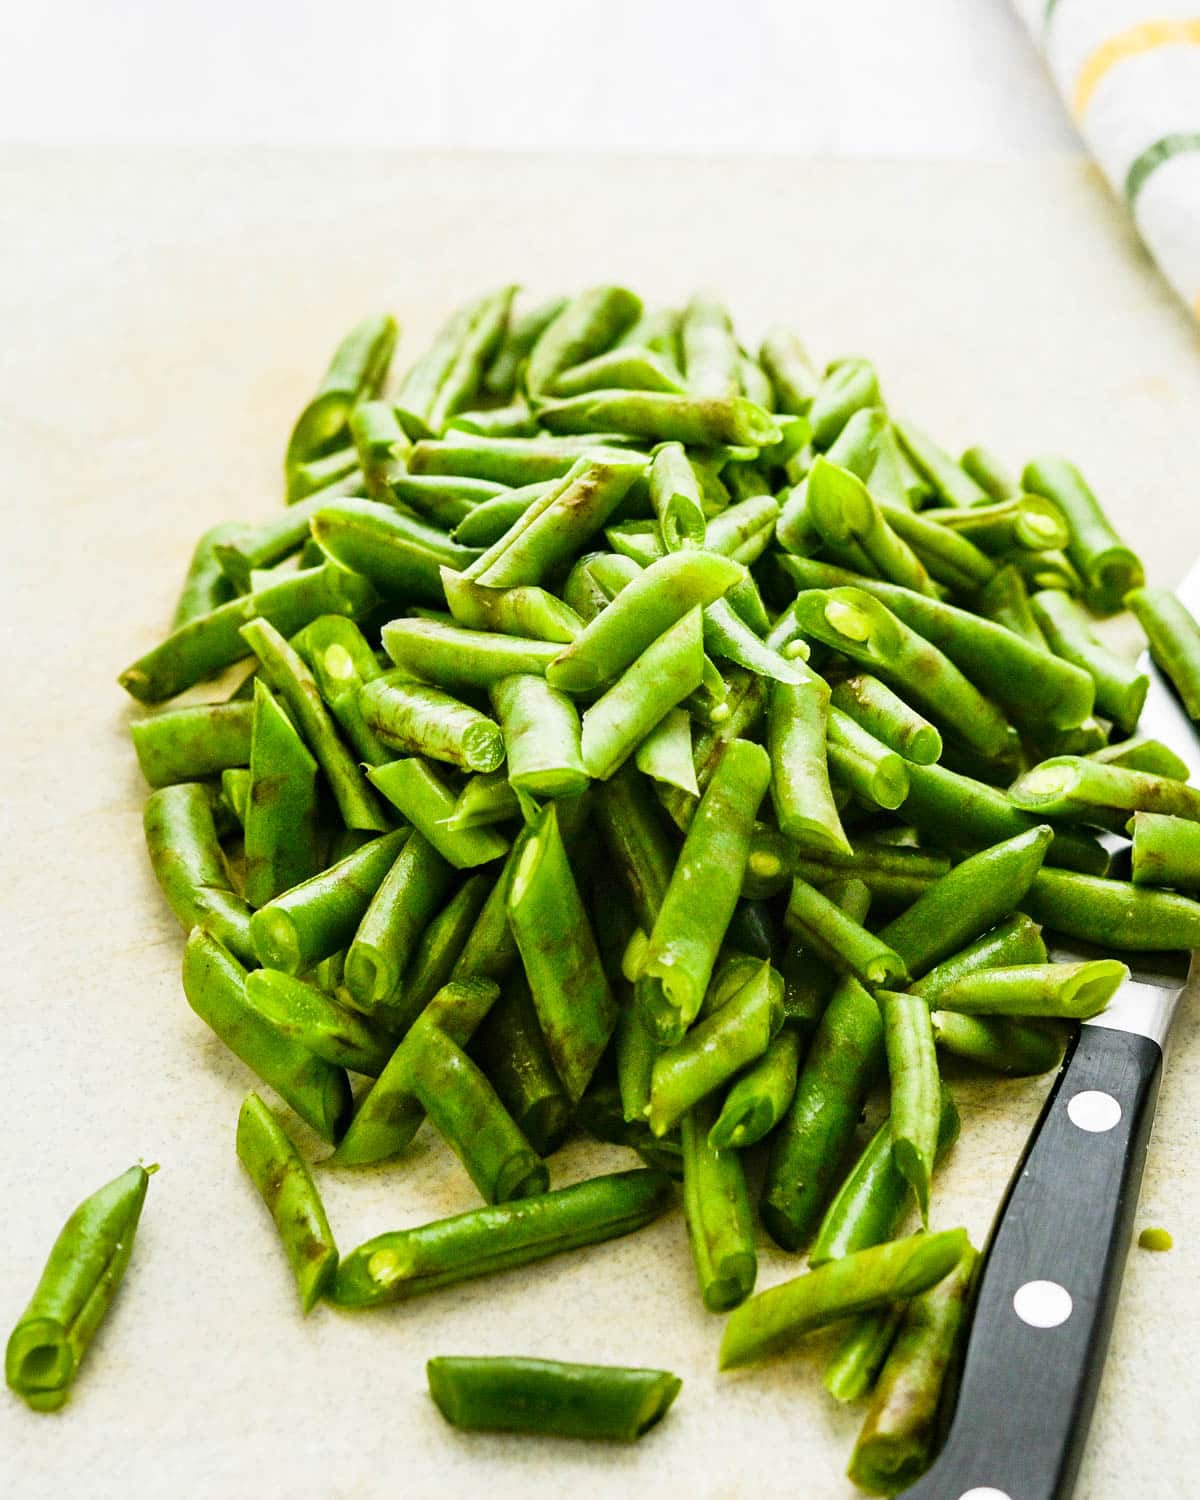 trimming green beans.